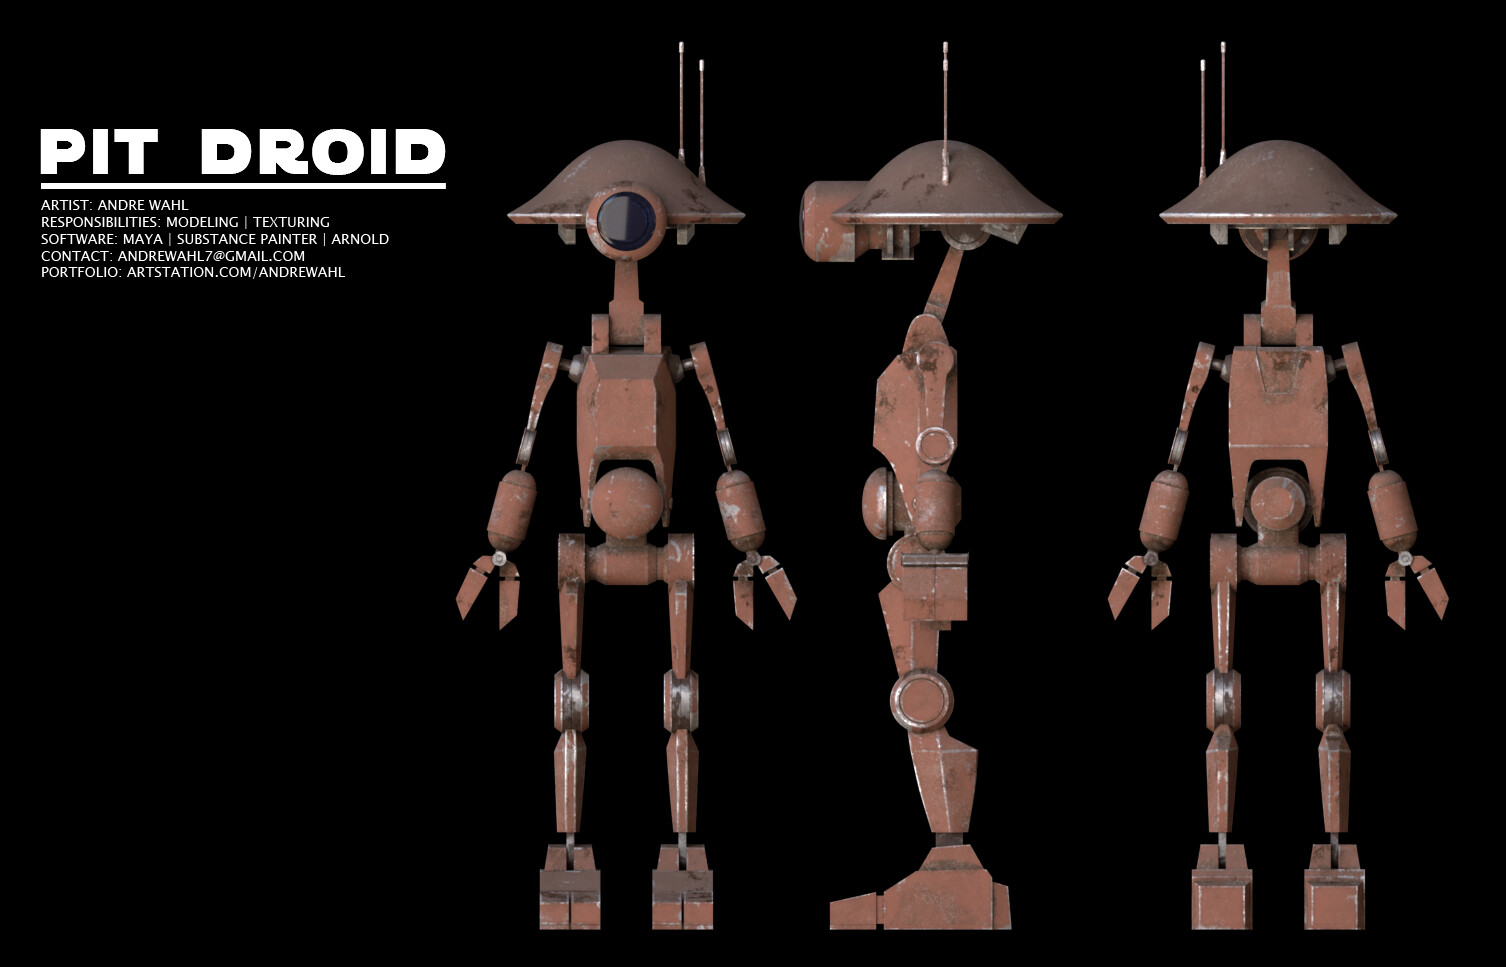 Andre Droid